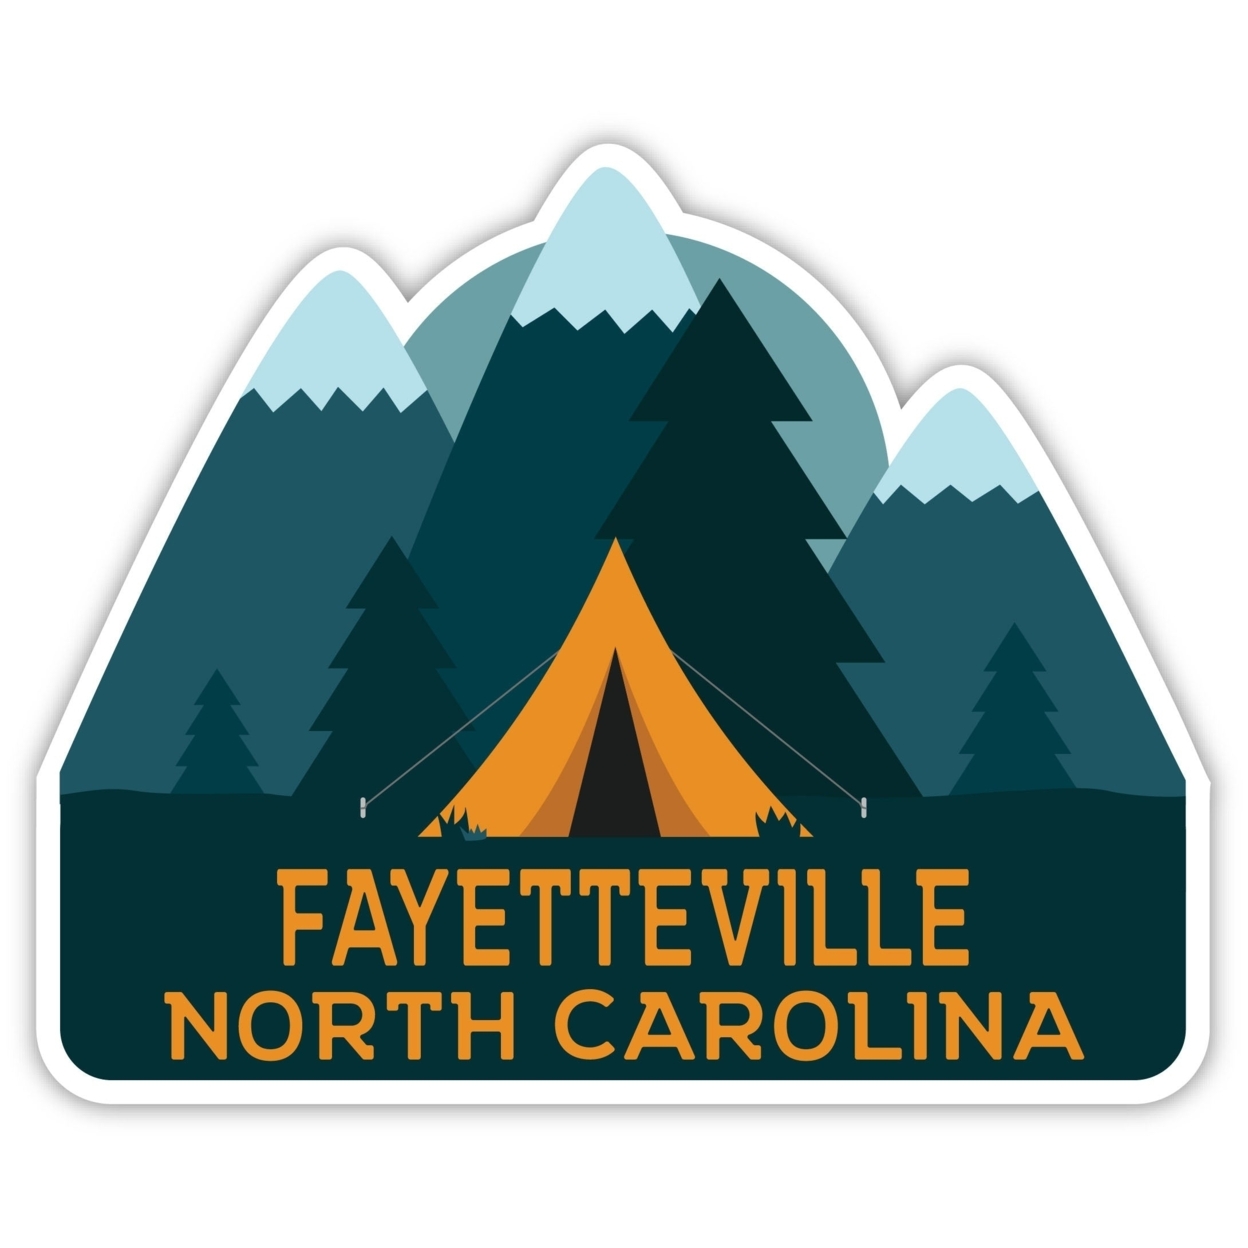 Fayetteville North Carolina Souvenir Decorative Stickers (Choose Theme And Size) - 4-Pack, 4-Inch, Bear